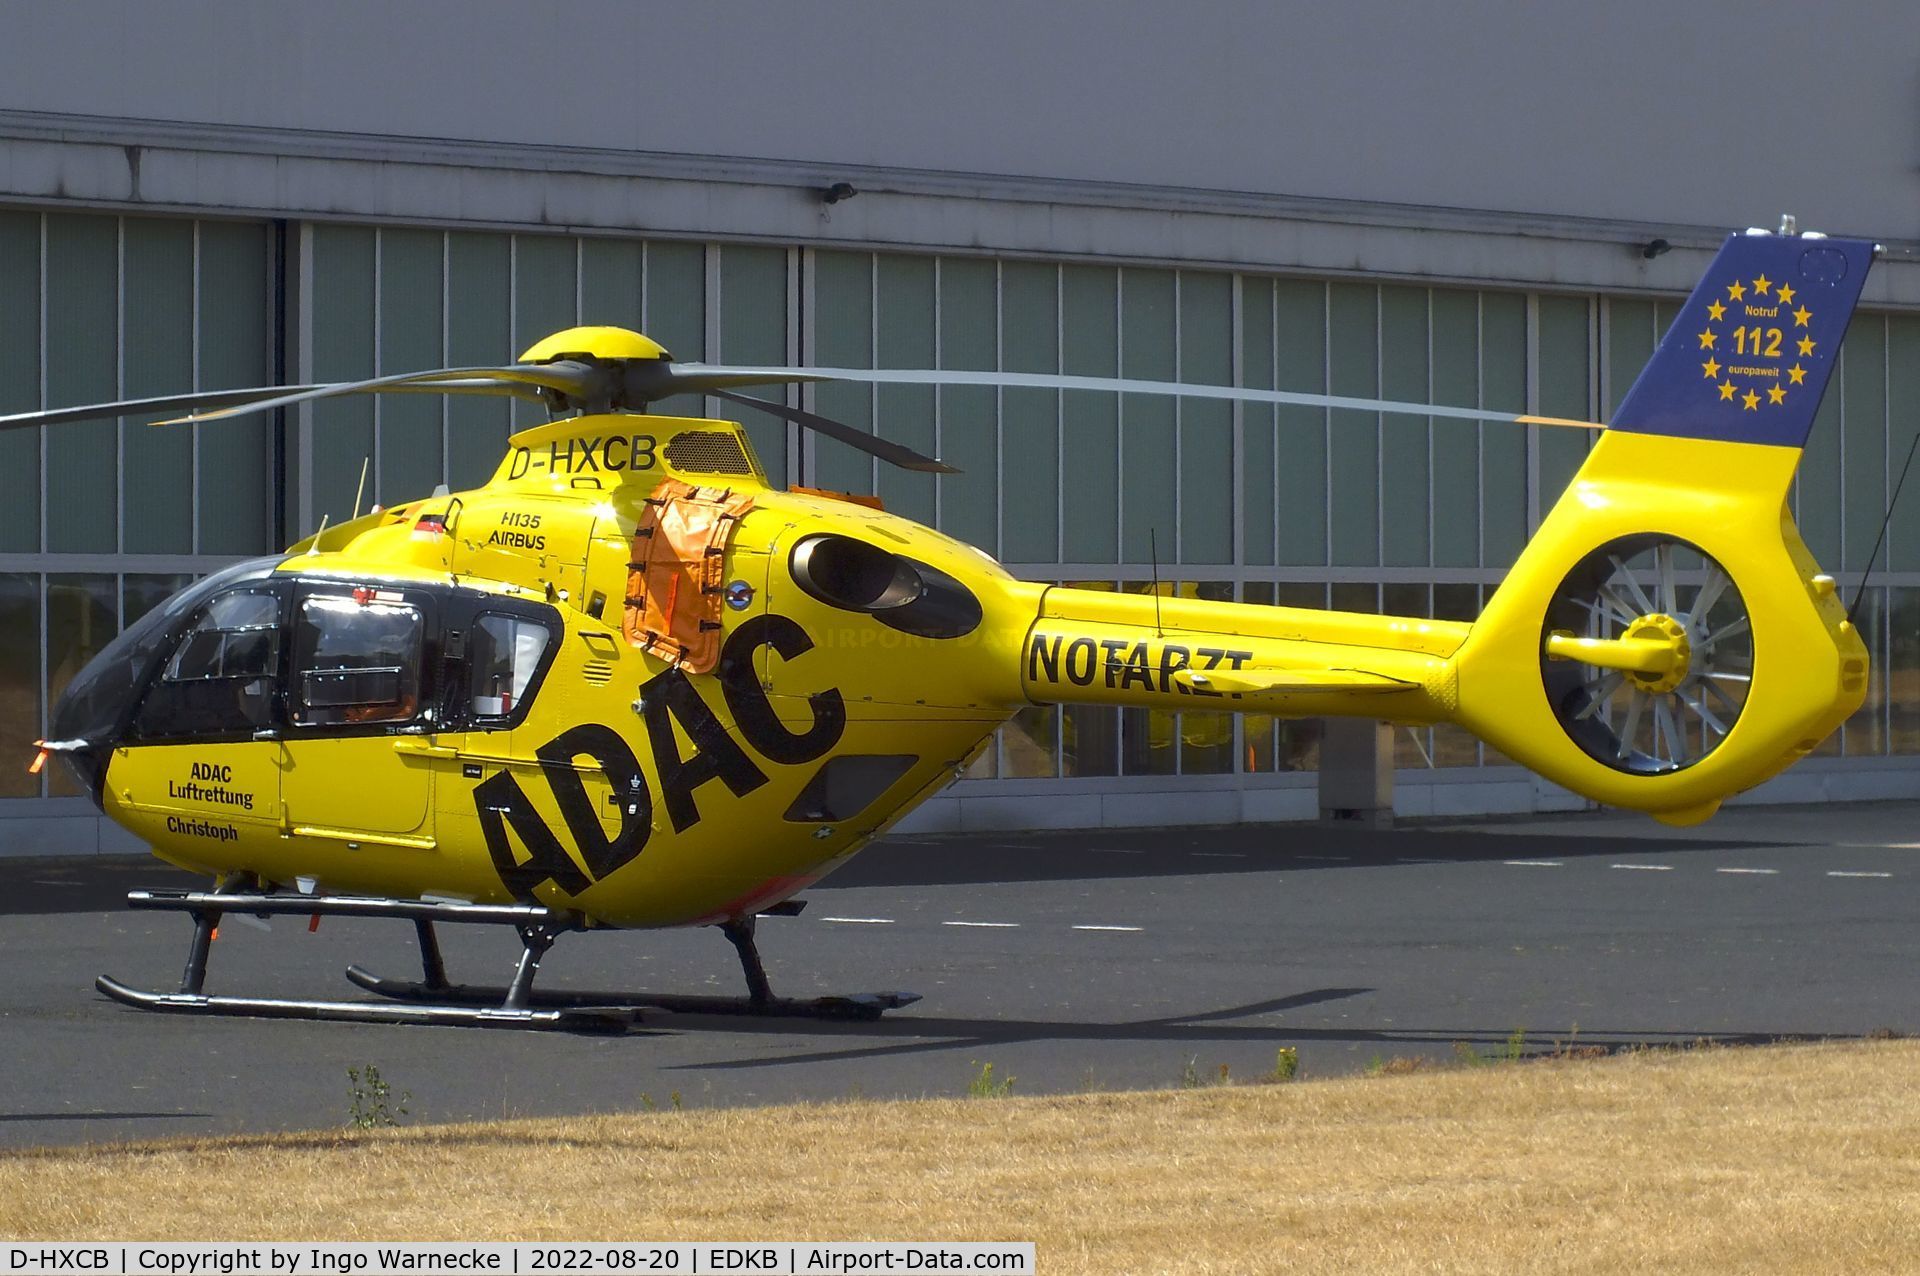 D-HXCB, 2020 Airbus Helicopters H135 - EC-135 P3 C/N 2119, Airbus Helicopters H135 (EC135P3) 'Christoph 31' EMS-helicopter of ADAC Luftrettung at Bonn-Hangelar airfield during the Grumman Fly-in 2022